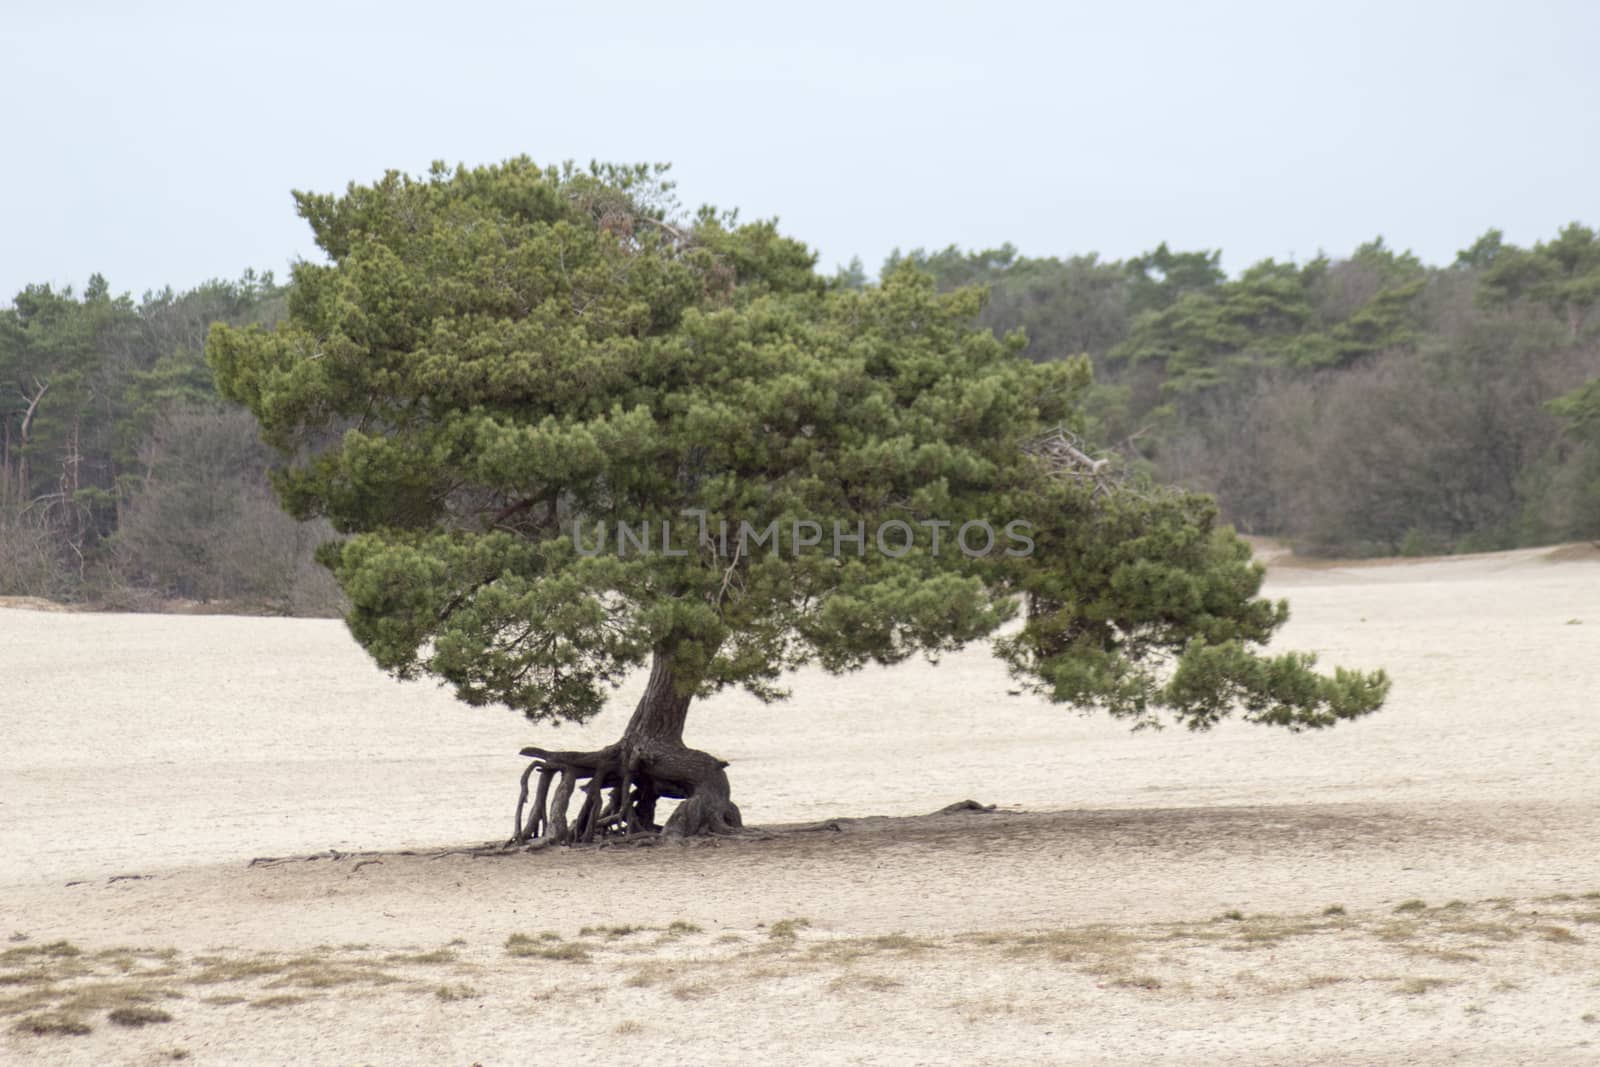 Walking tree on dunes from soesduinen in north holland